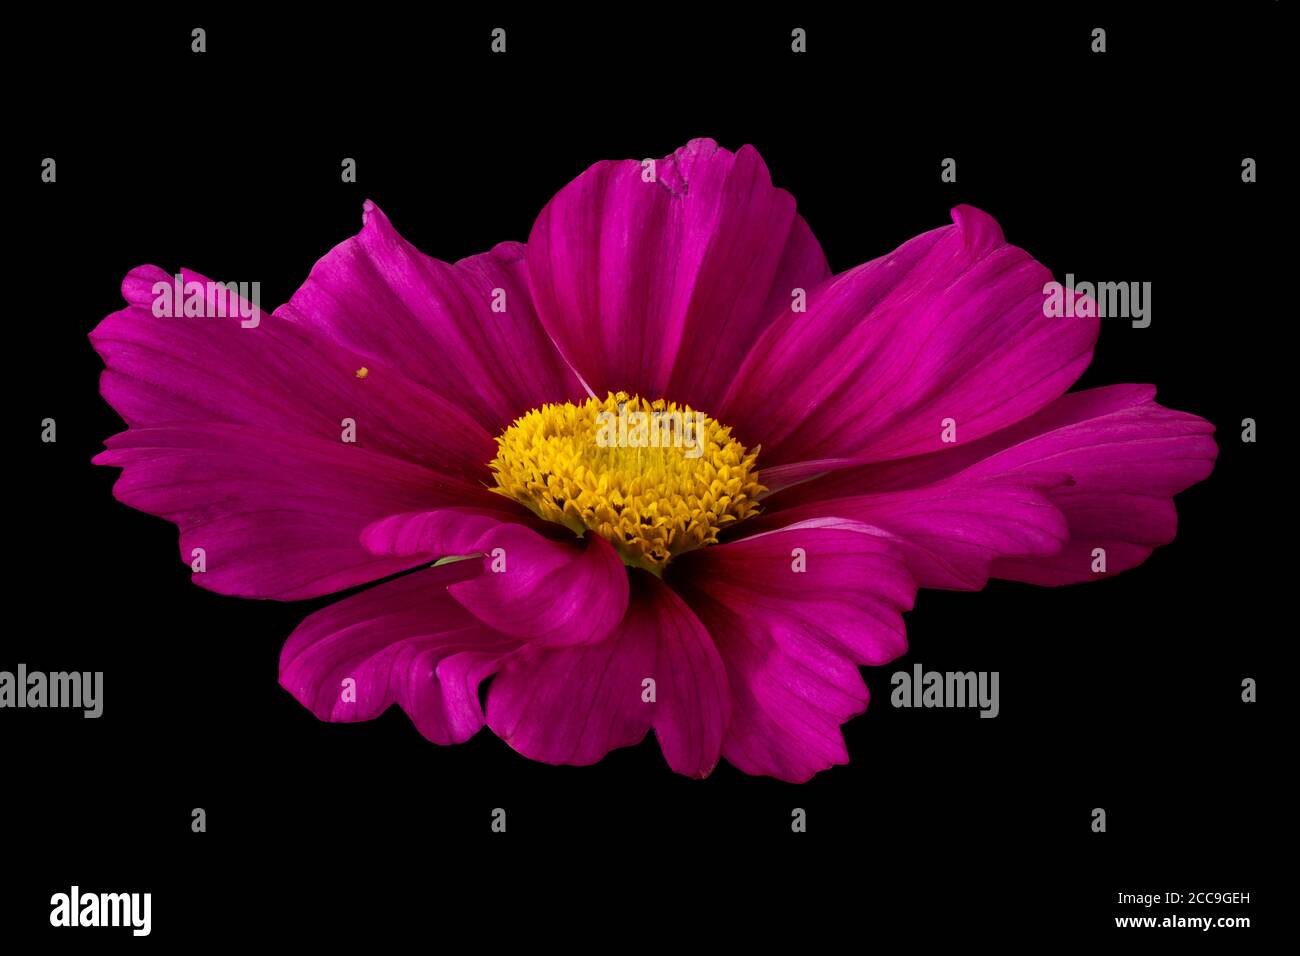 Color front view closeup of a single isolated wide open red cosmos blossom on black background Stock Photo